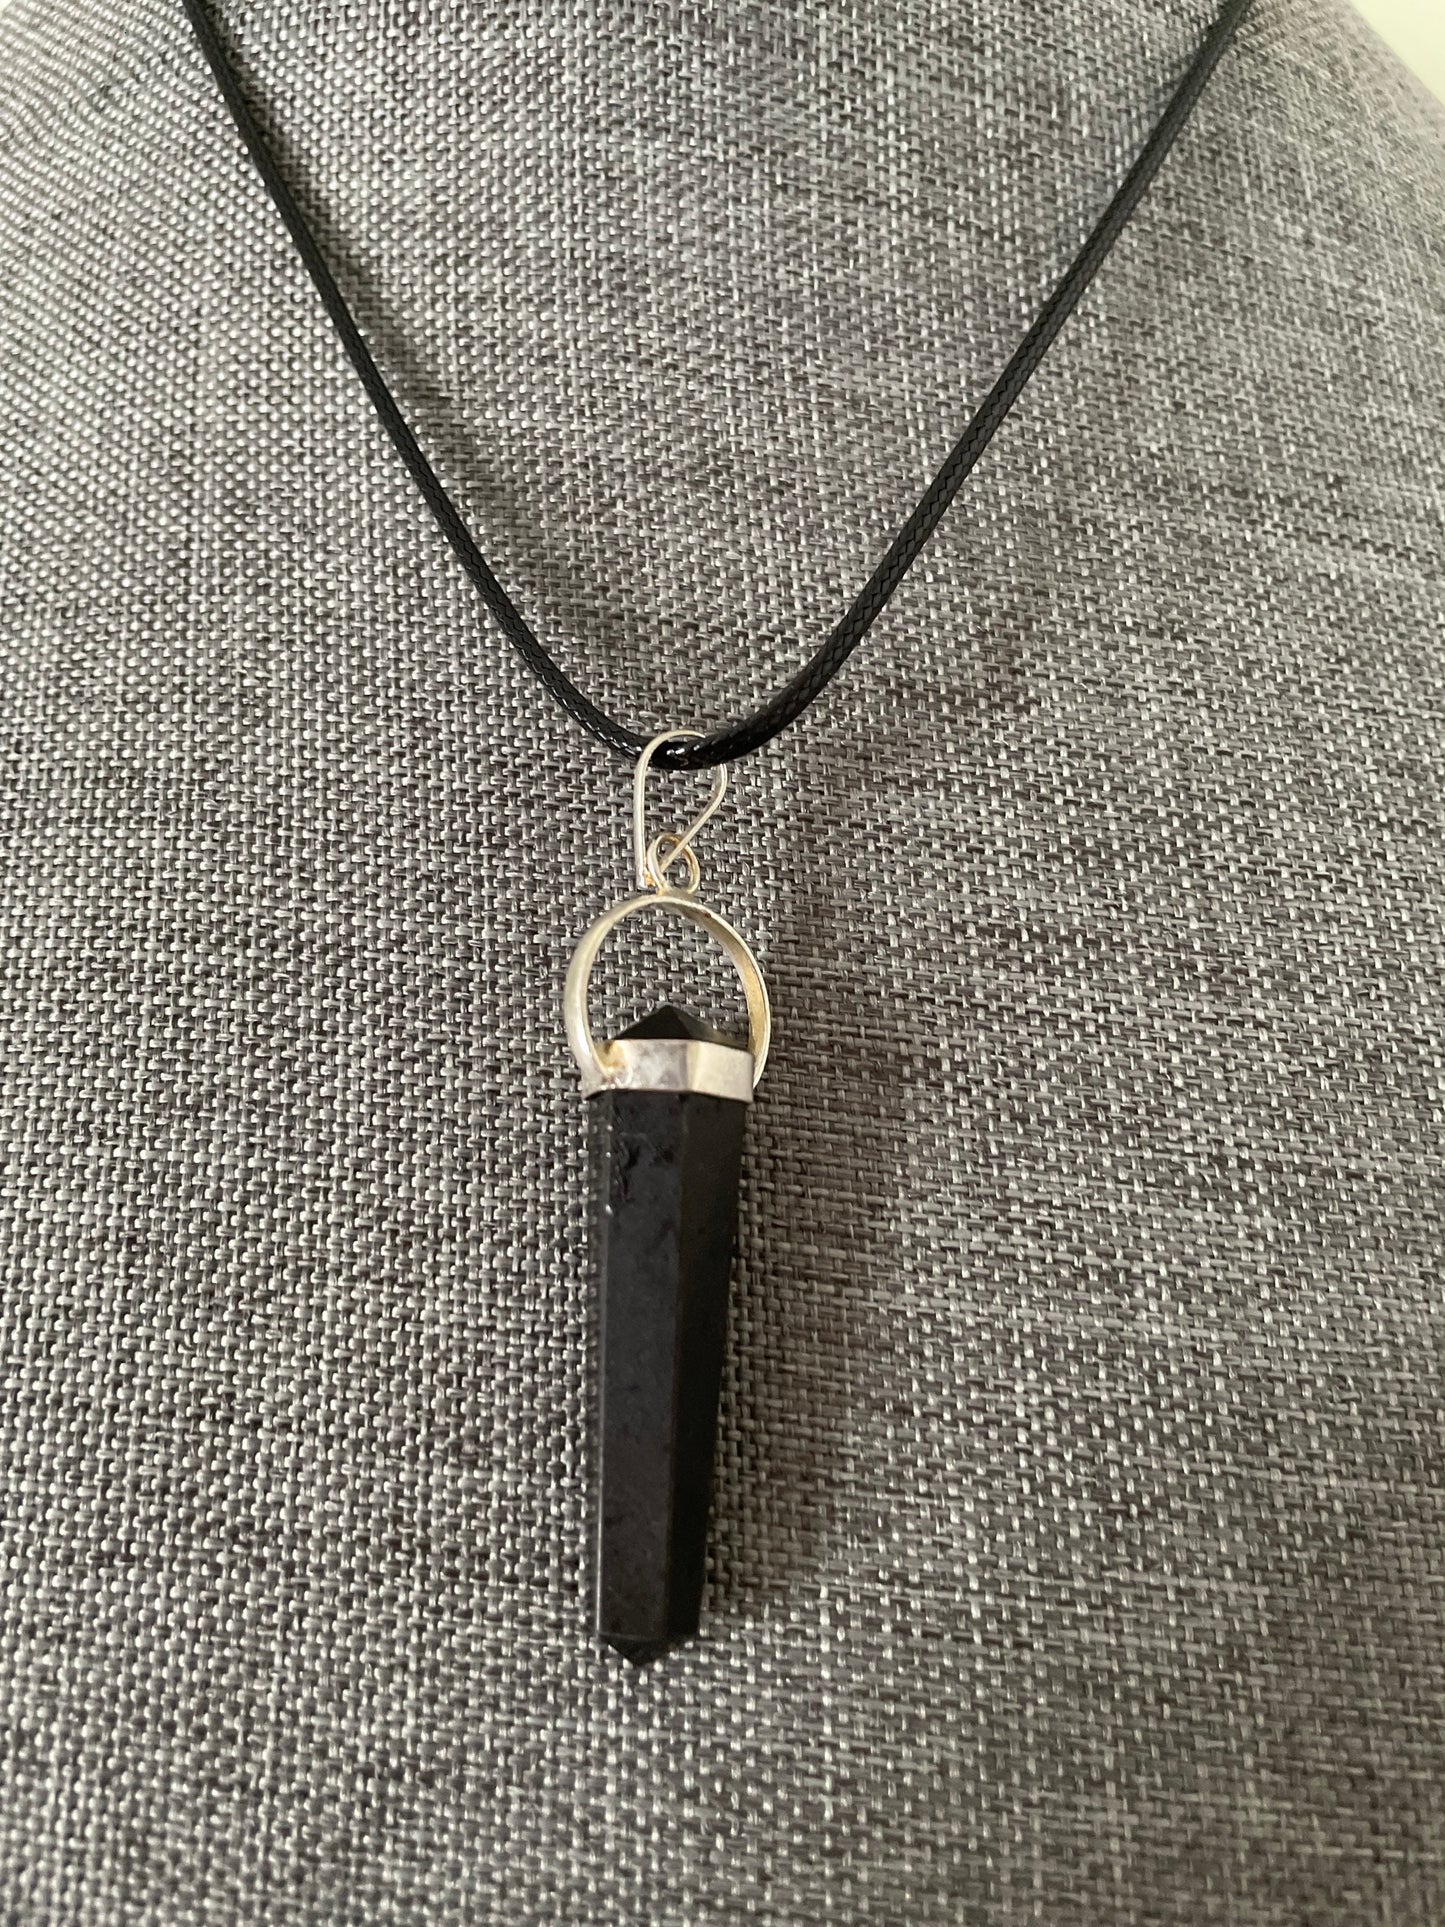 Gorgeous black obsidian point pendant wrapped with silver on a nylon cord